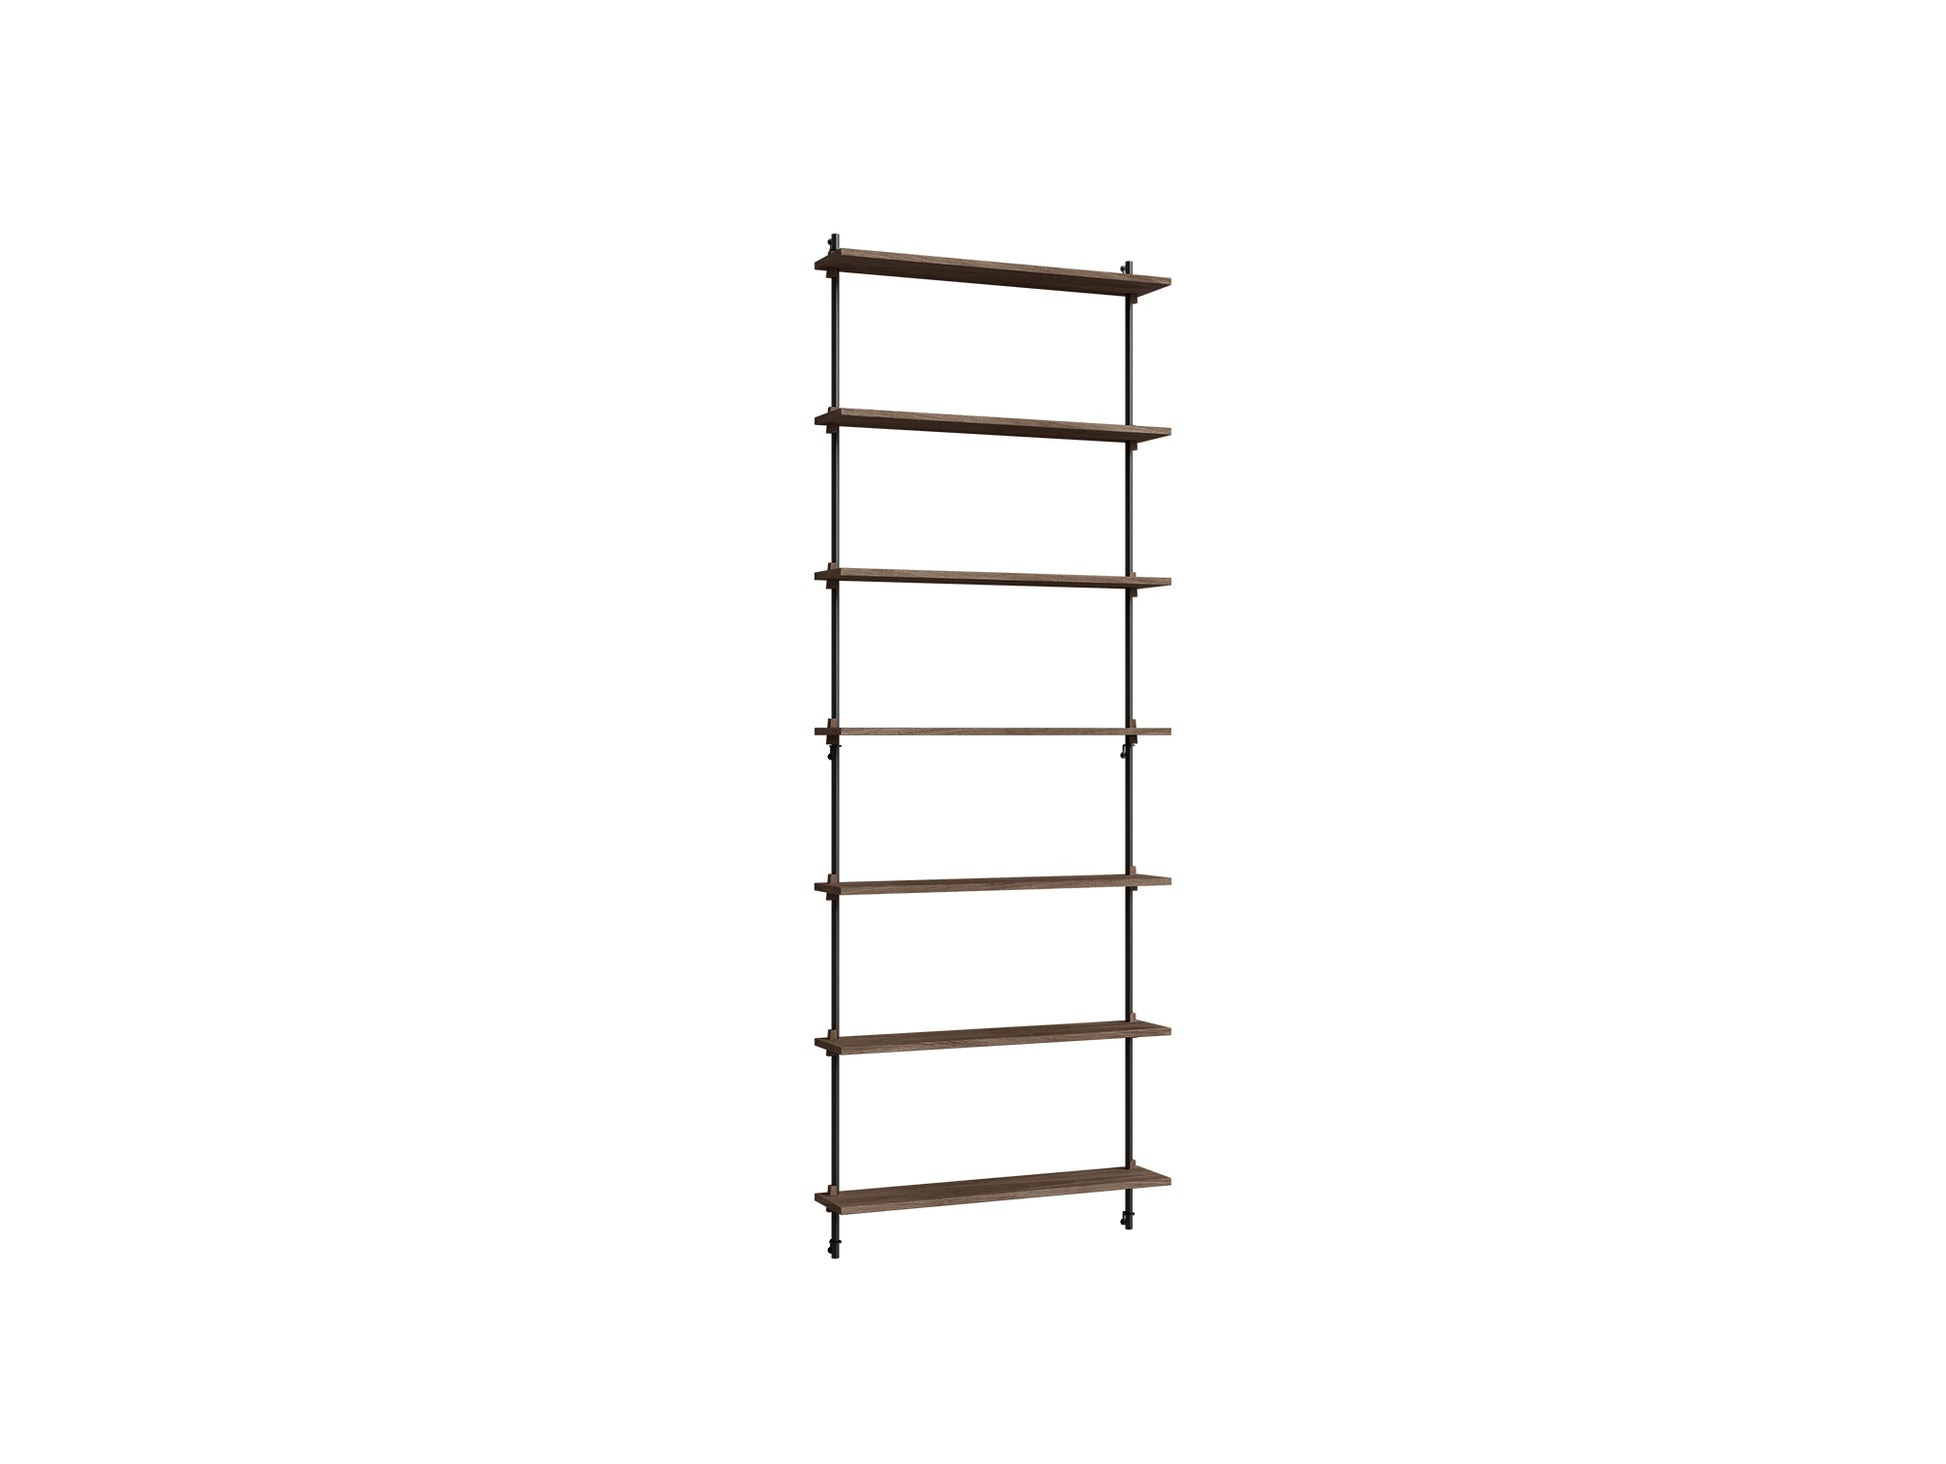 Wall Shelving System Sets (230 cm) by Moebe - WS.230.1 / Black Uprights / Smoked Oak